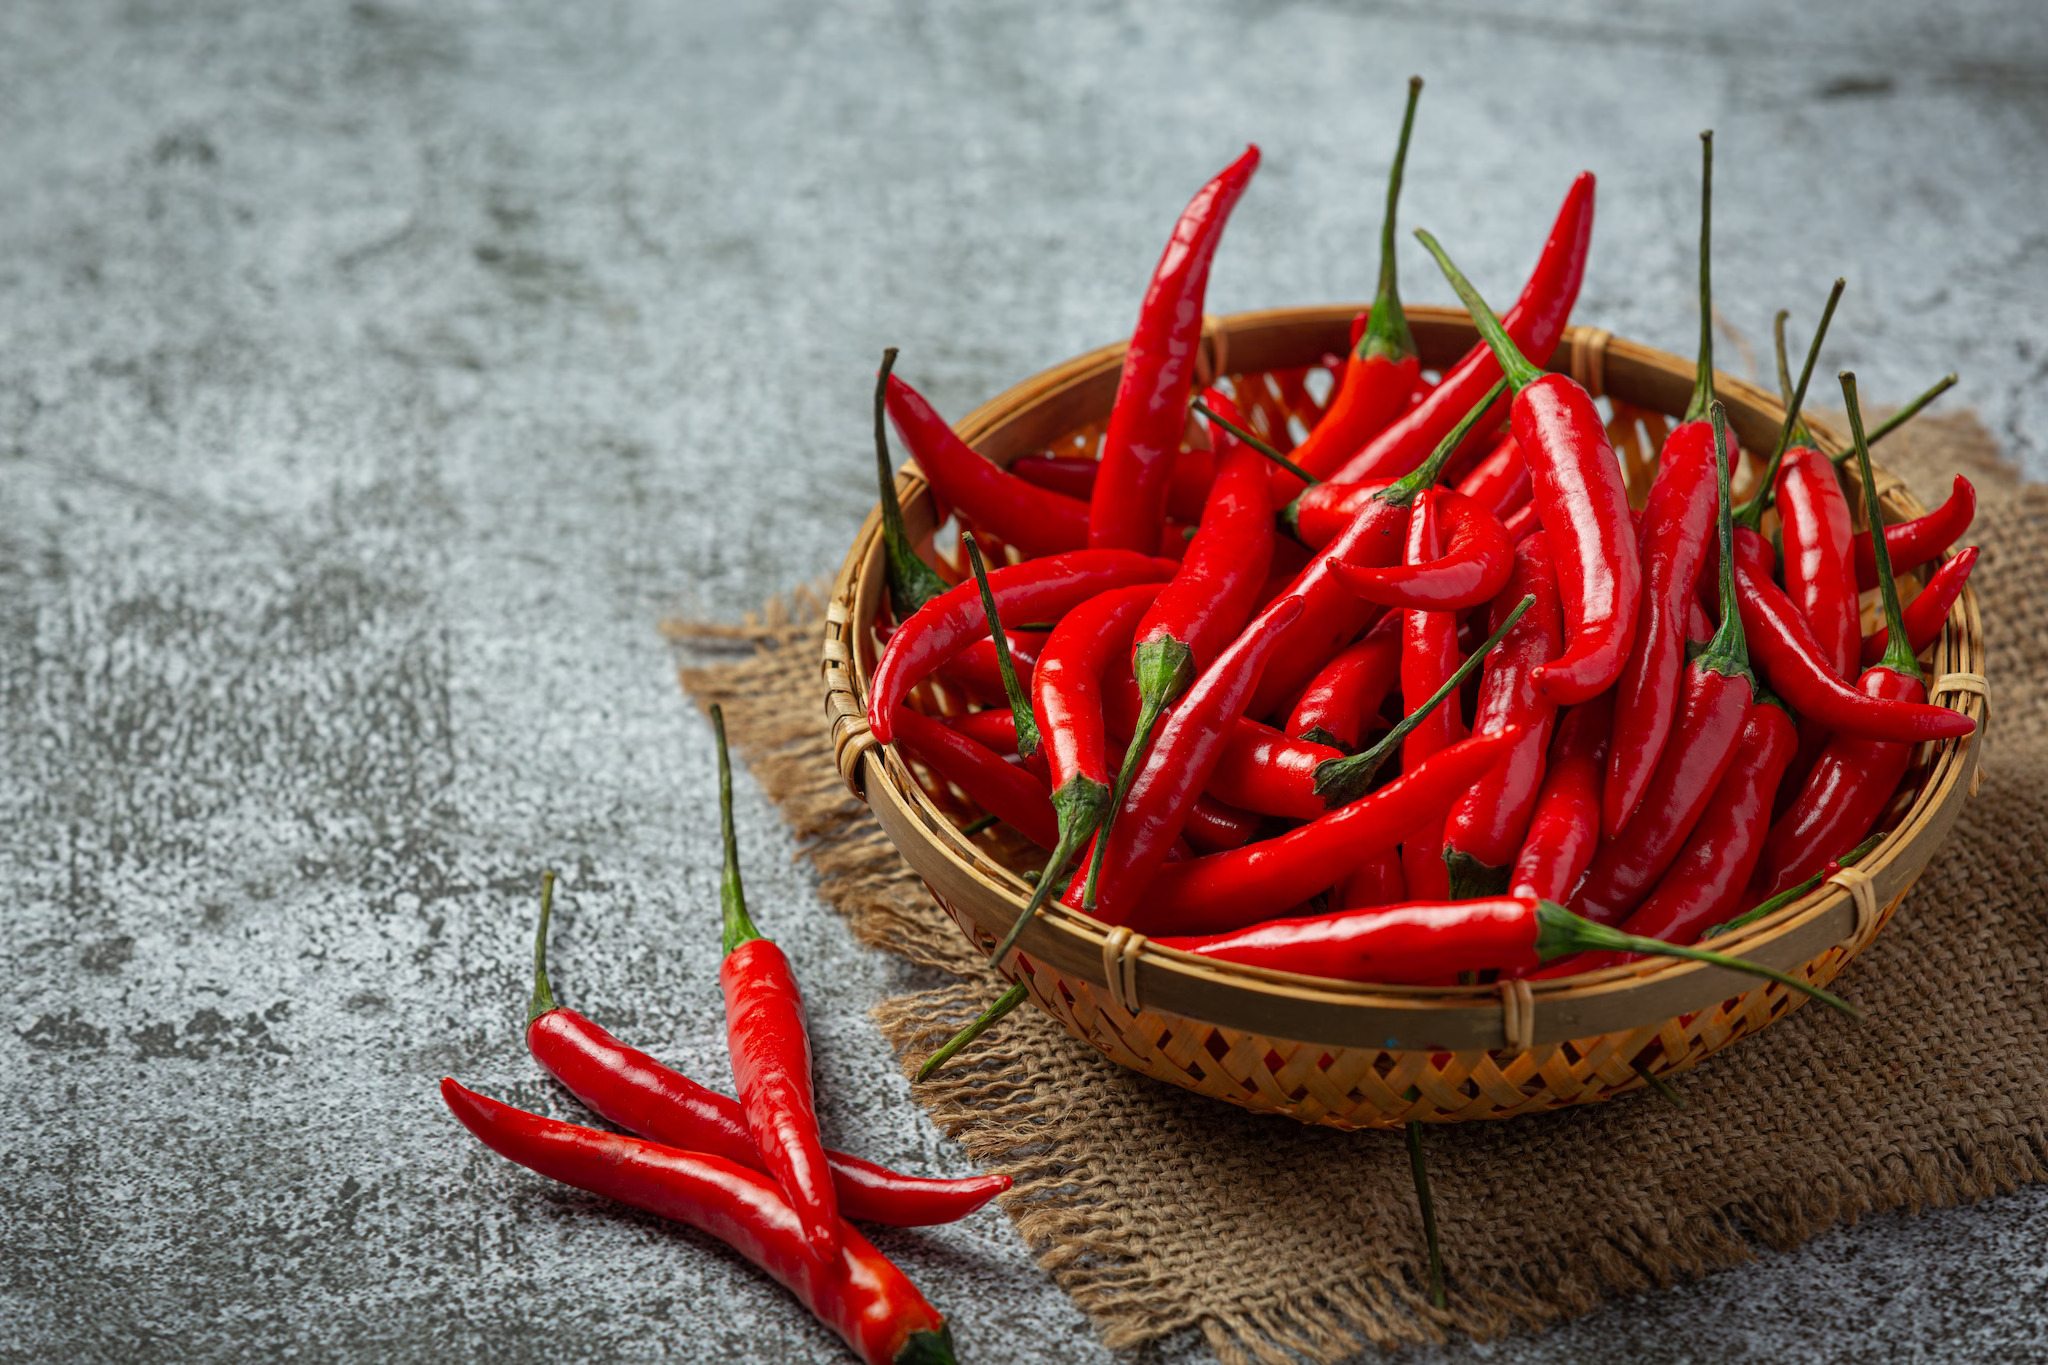 Nutrition Content Of Red Chile?